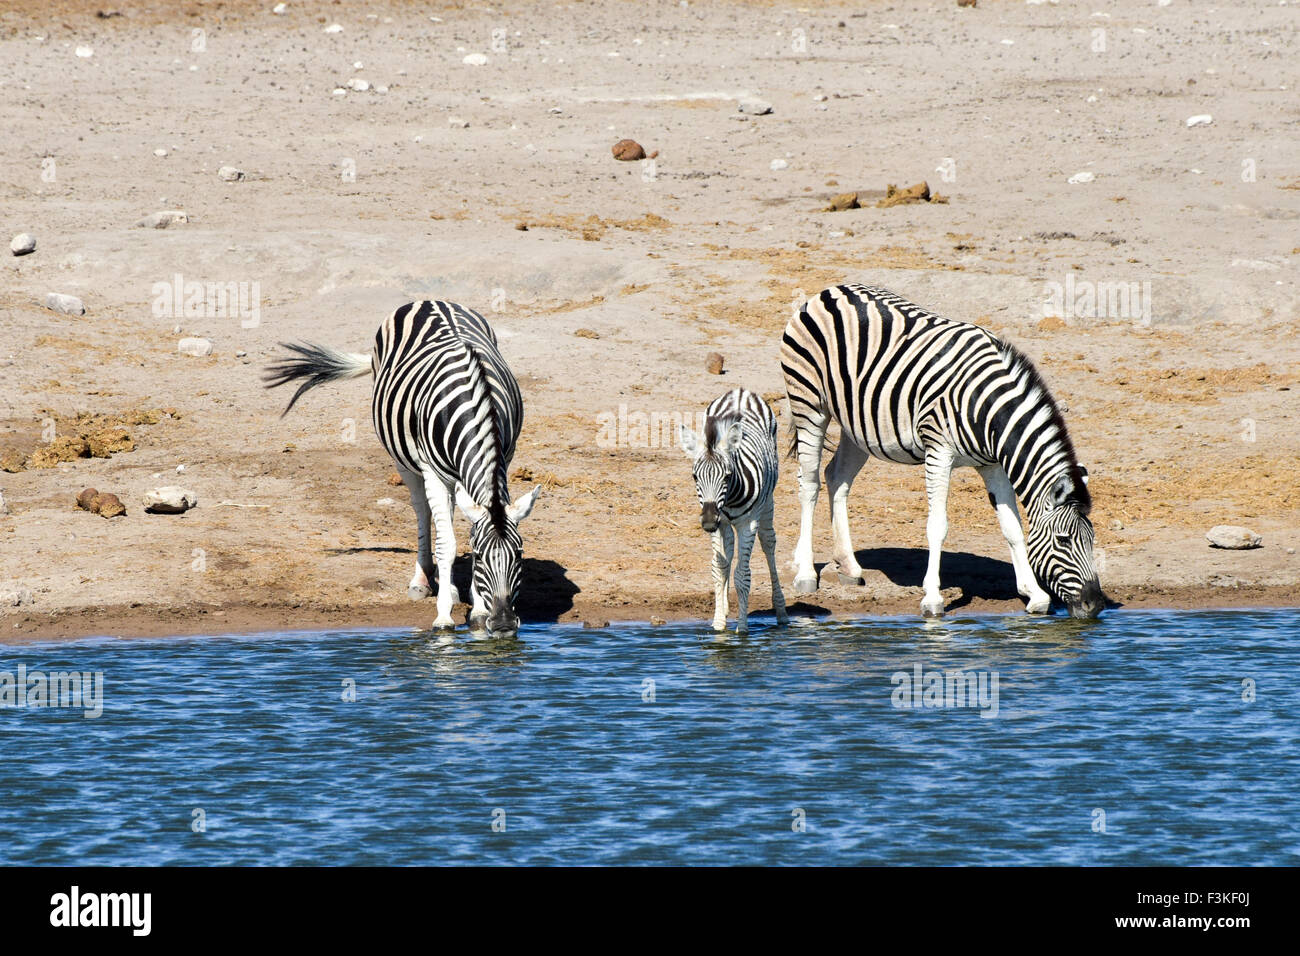 Zebras drinking at a water hole in the wild in Etosha National Park, Namibia, Africa. Stock Photo